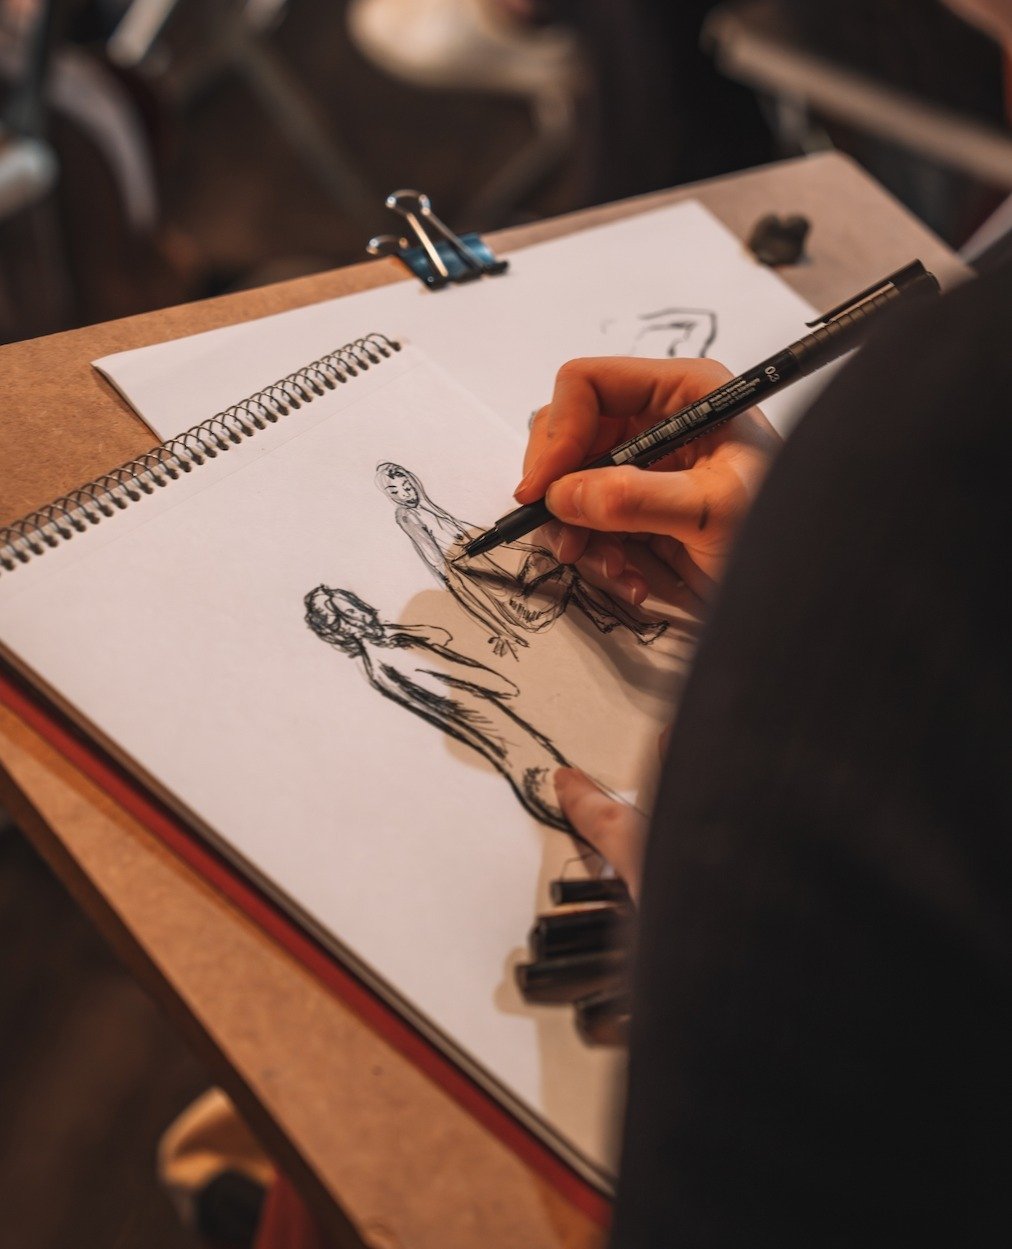 Get creative at @emptywallvancouver! ✍️⁠
⁠
Join @drawaroundvancouver for a 2 hr life drawing session while being inspired by @emptywallvancouver's collection of original paintings, pop art sculptures, and high-quality prints from local and internatio